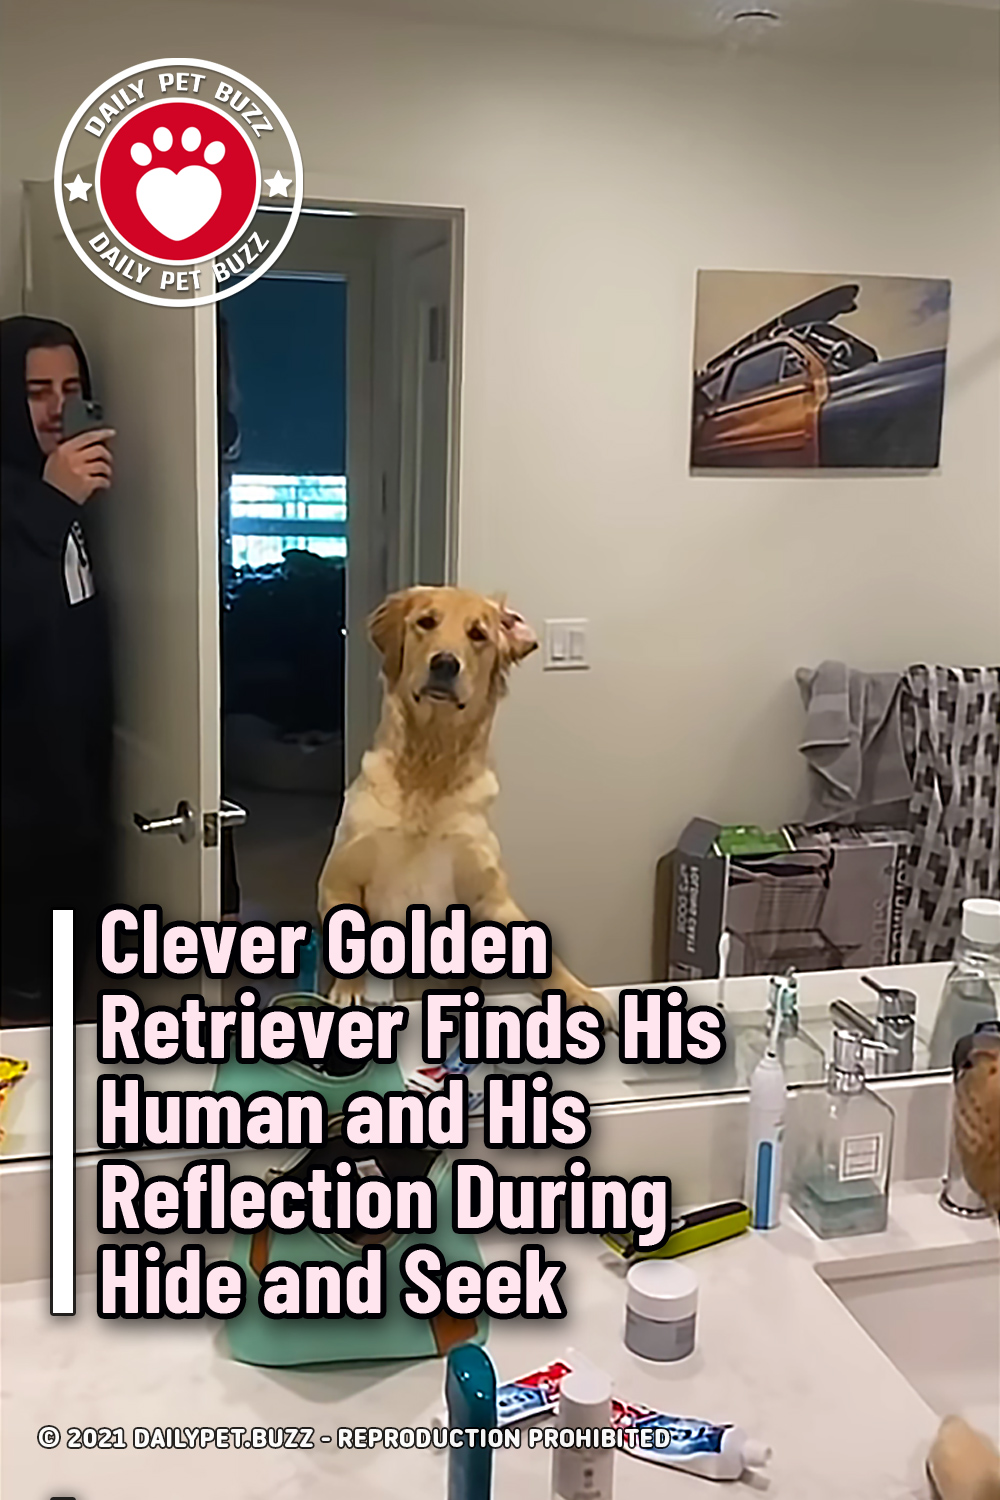 Clever Golden Retriever Finds His Human and His Reflection During Hide and Seek